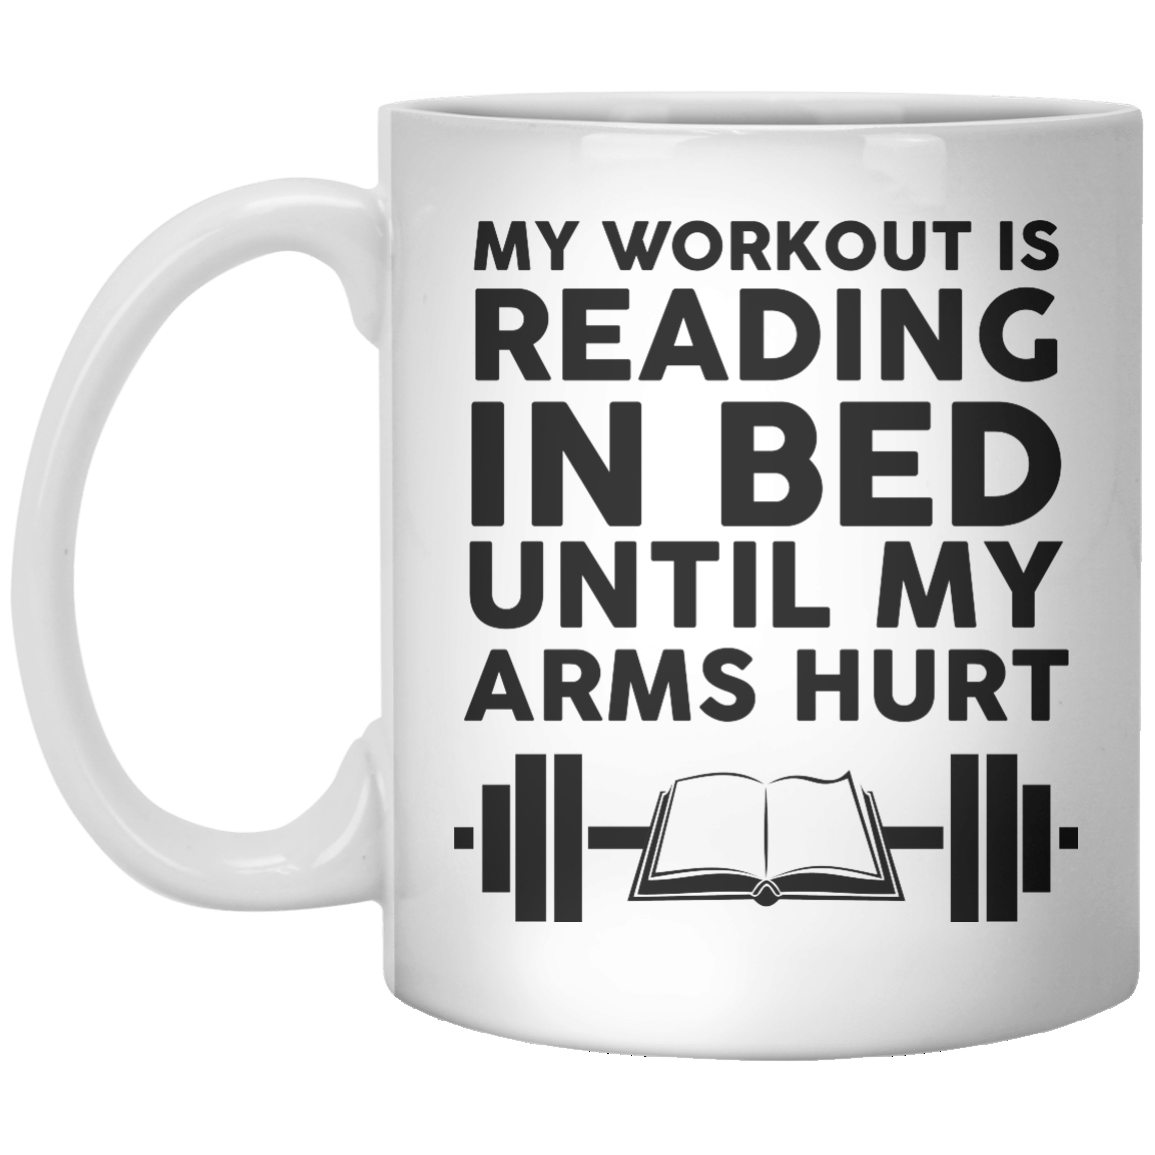 My Workout Is Reading In Bed Until My Arms Hurt - Shirtoopia